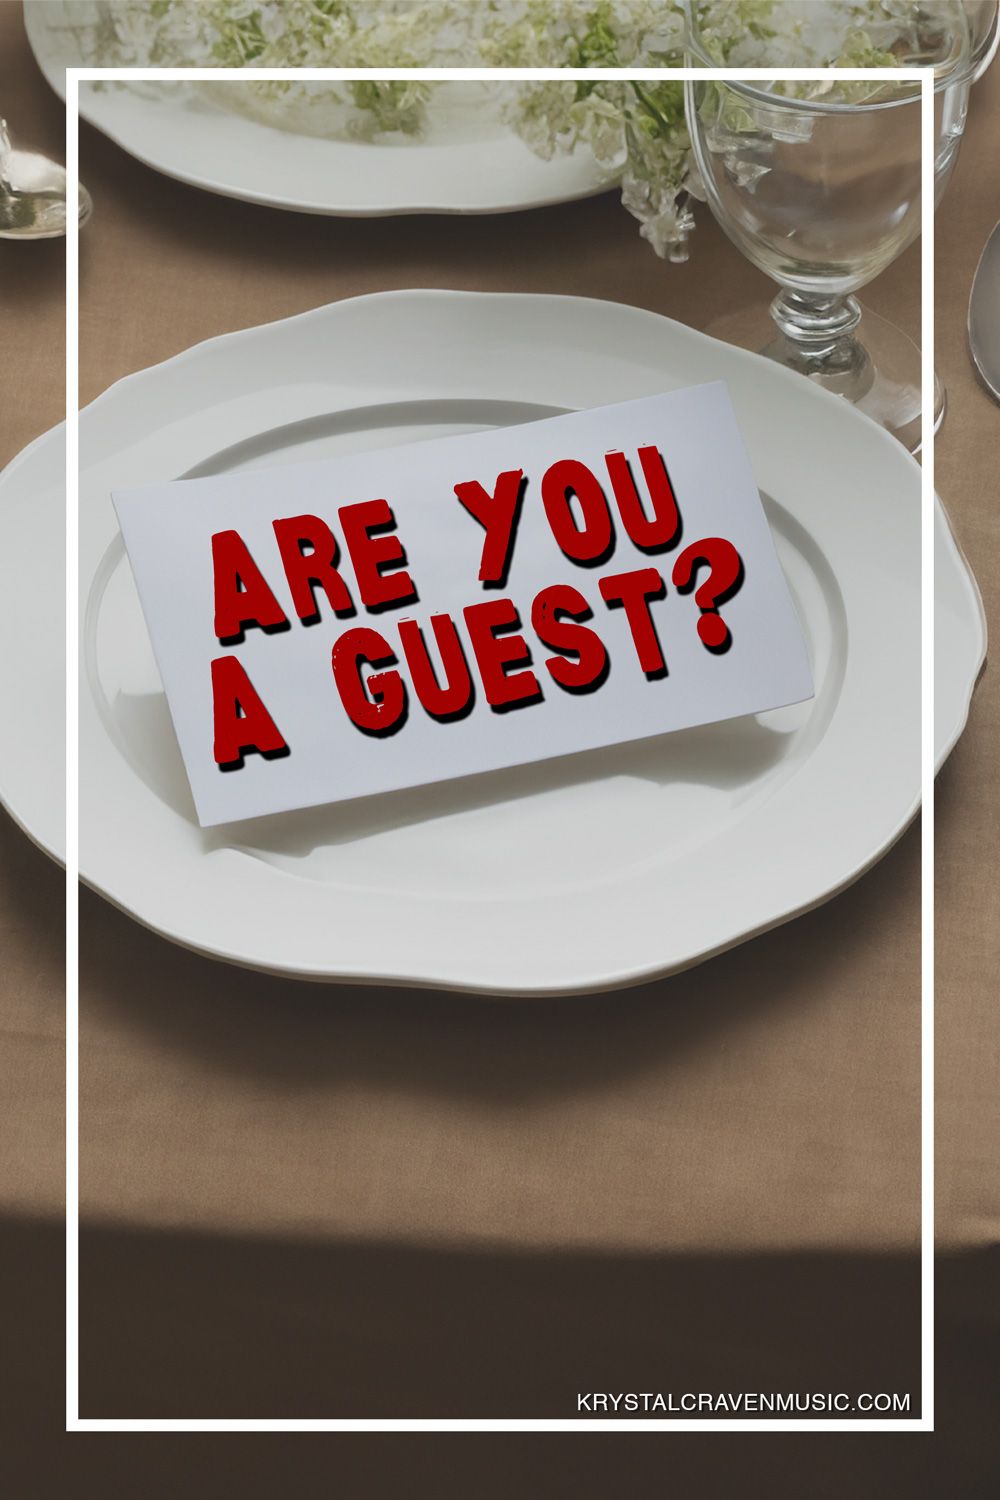 The title text "Are you a guest?" on a card set on a plate at a formal plate setting.